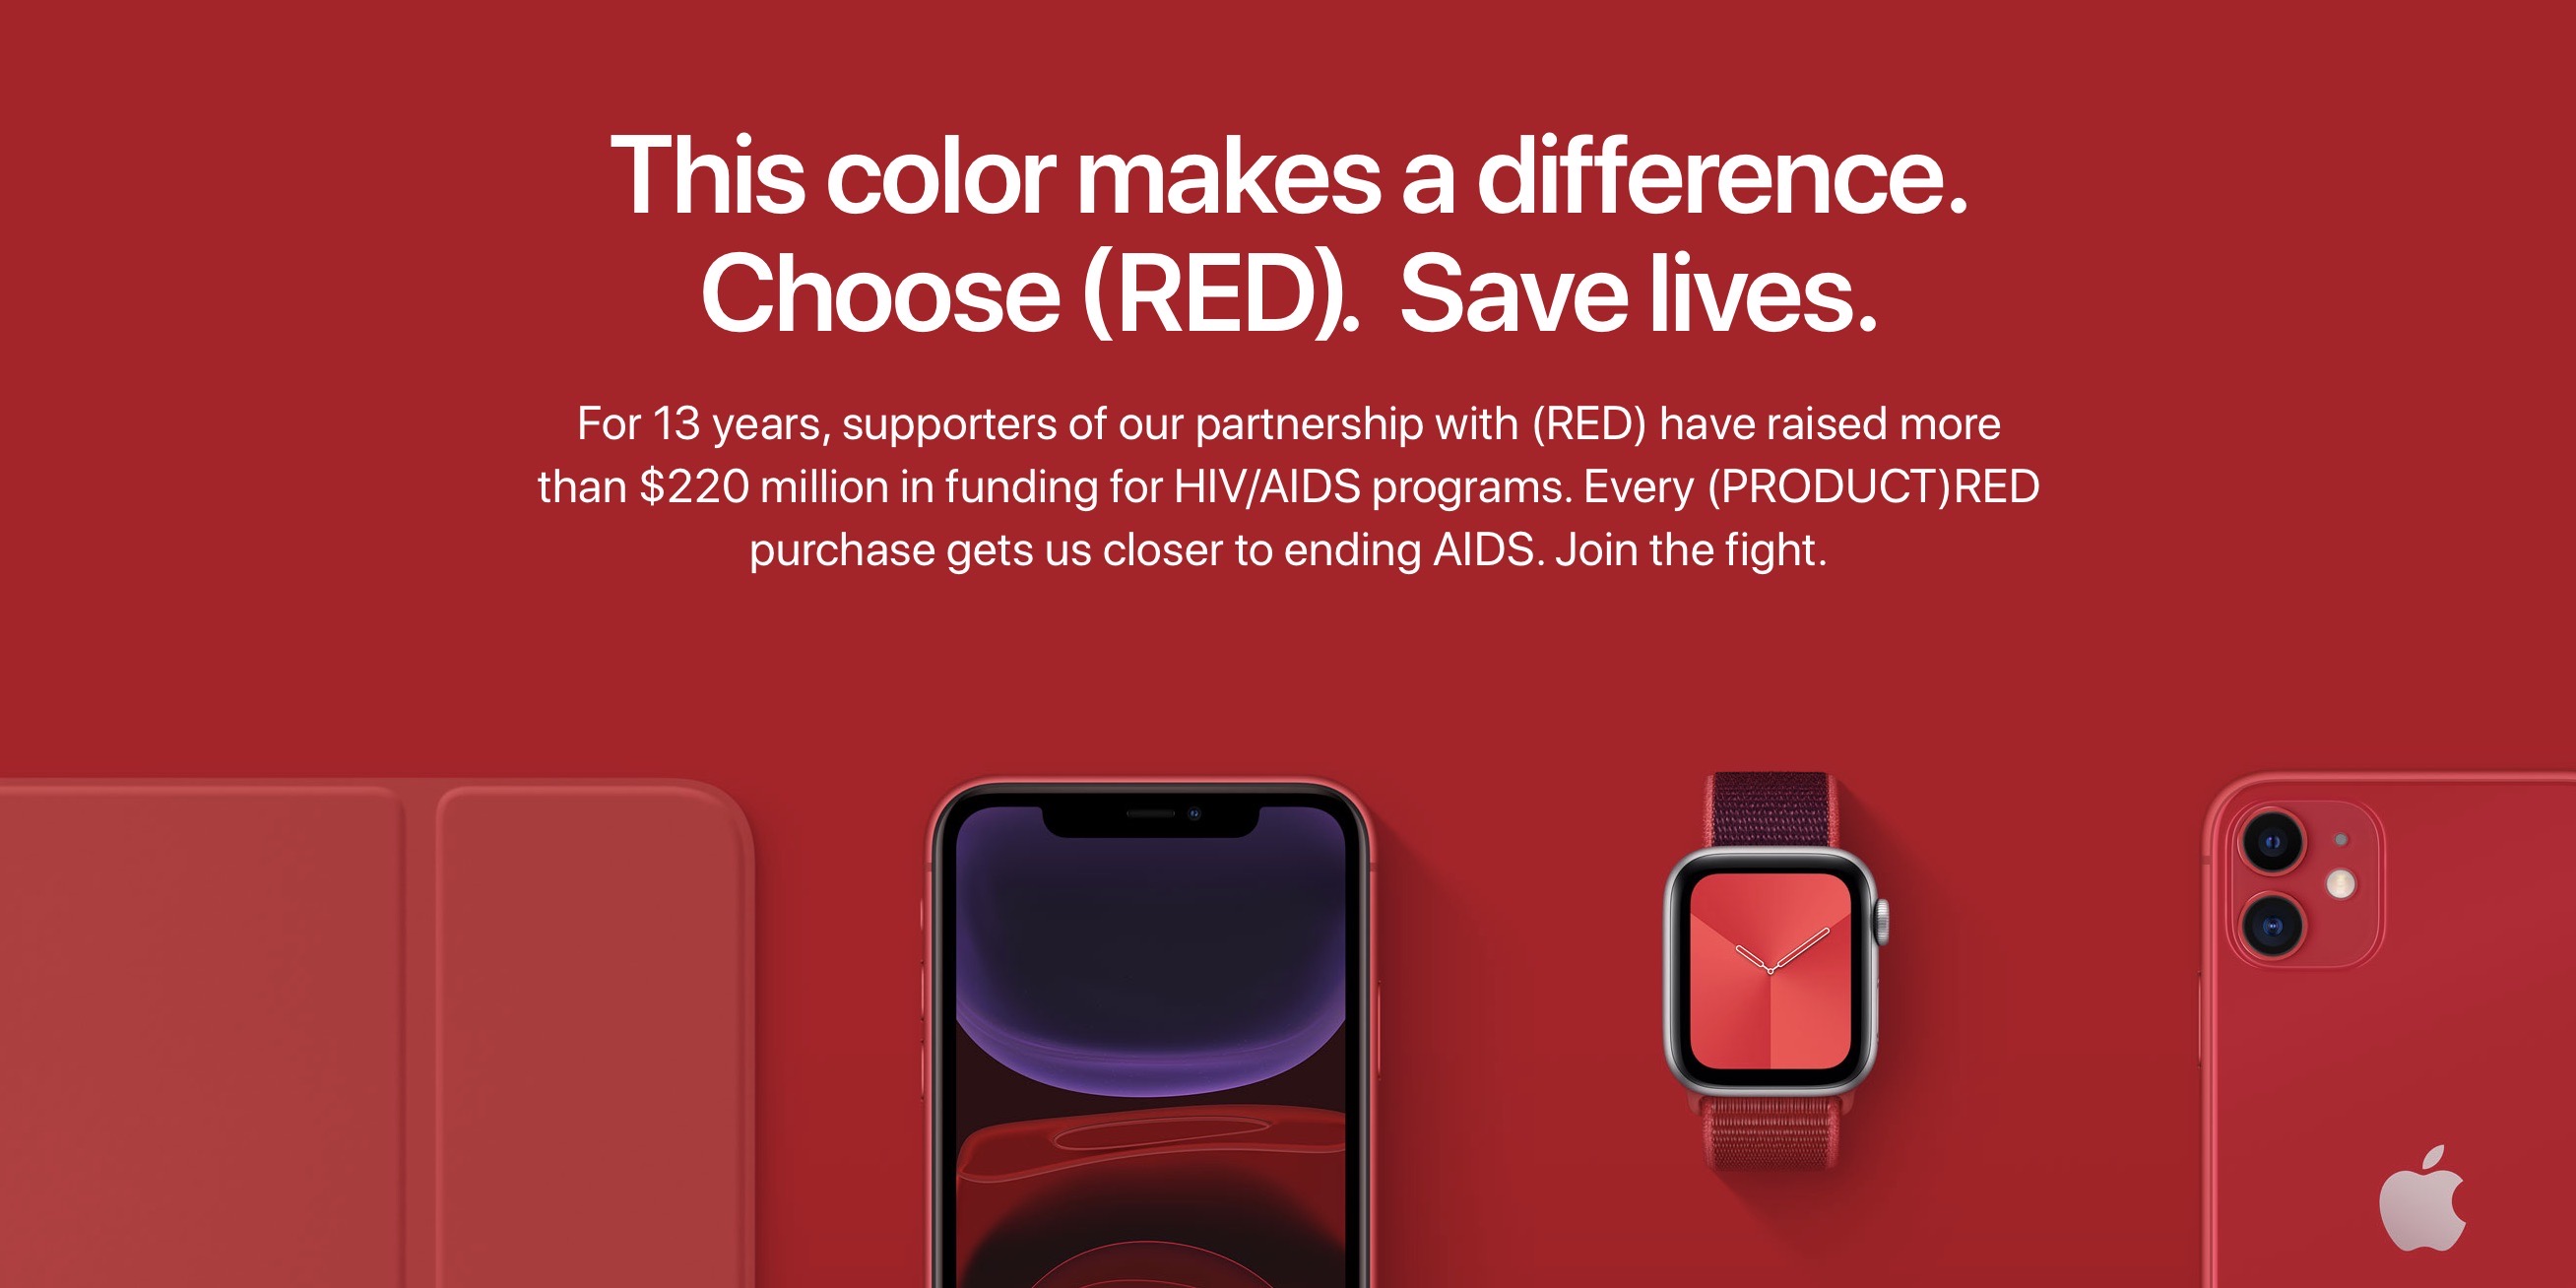 Tim Cook says has donated $220M to (RED) help fight AIDS -